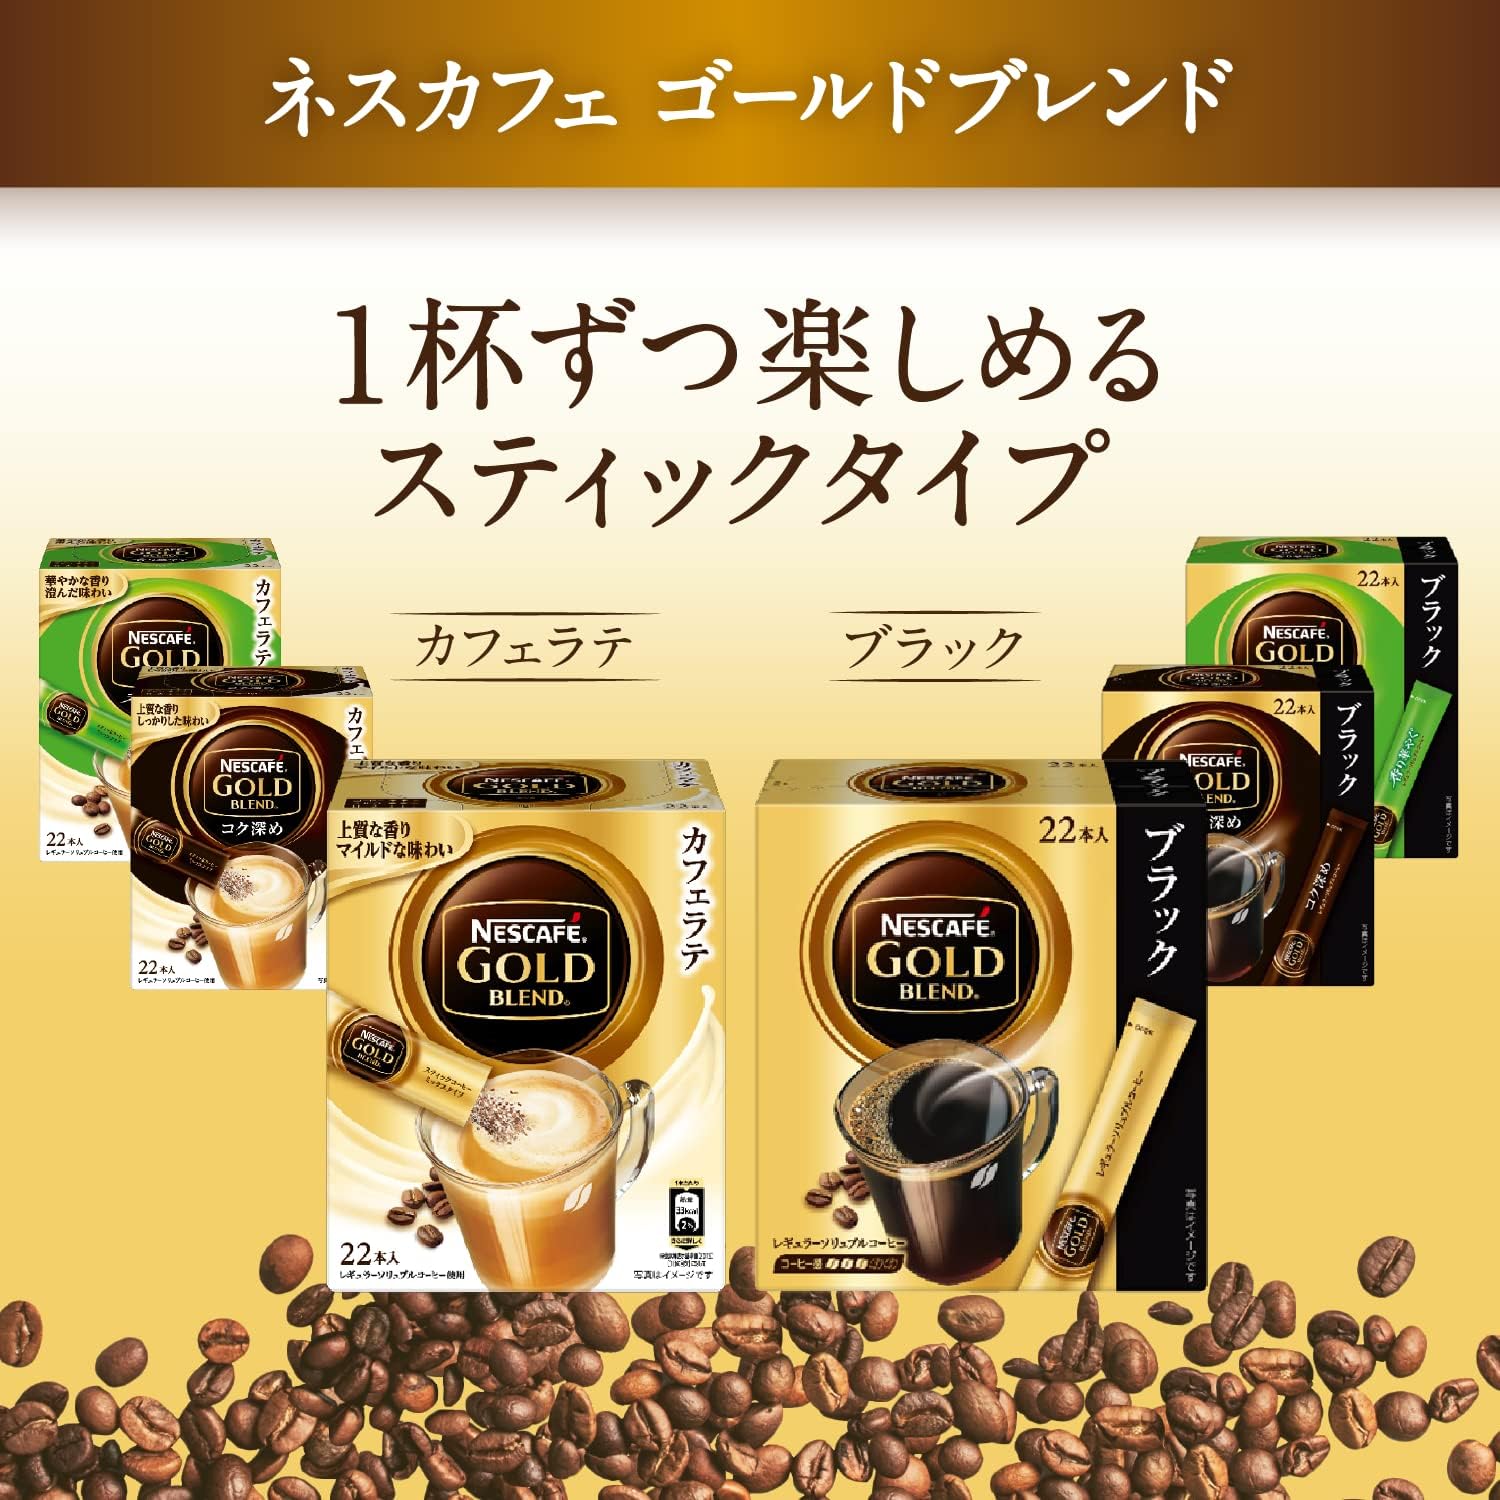 nes Cafe Gold Blend fragrance ... Cafe Latte stick coffee 22P ×2 box 44 cup minute 